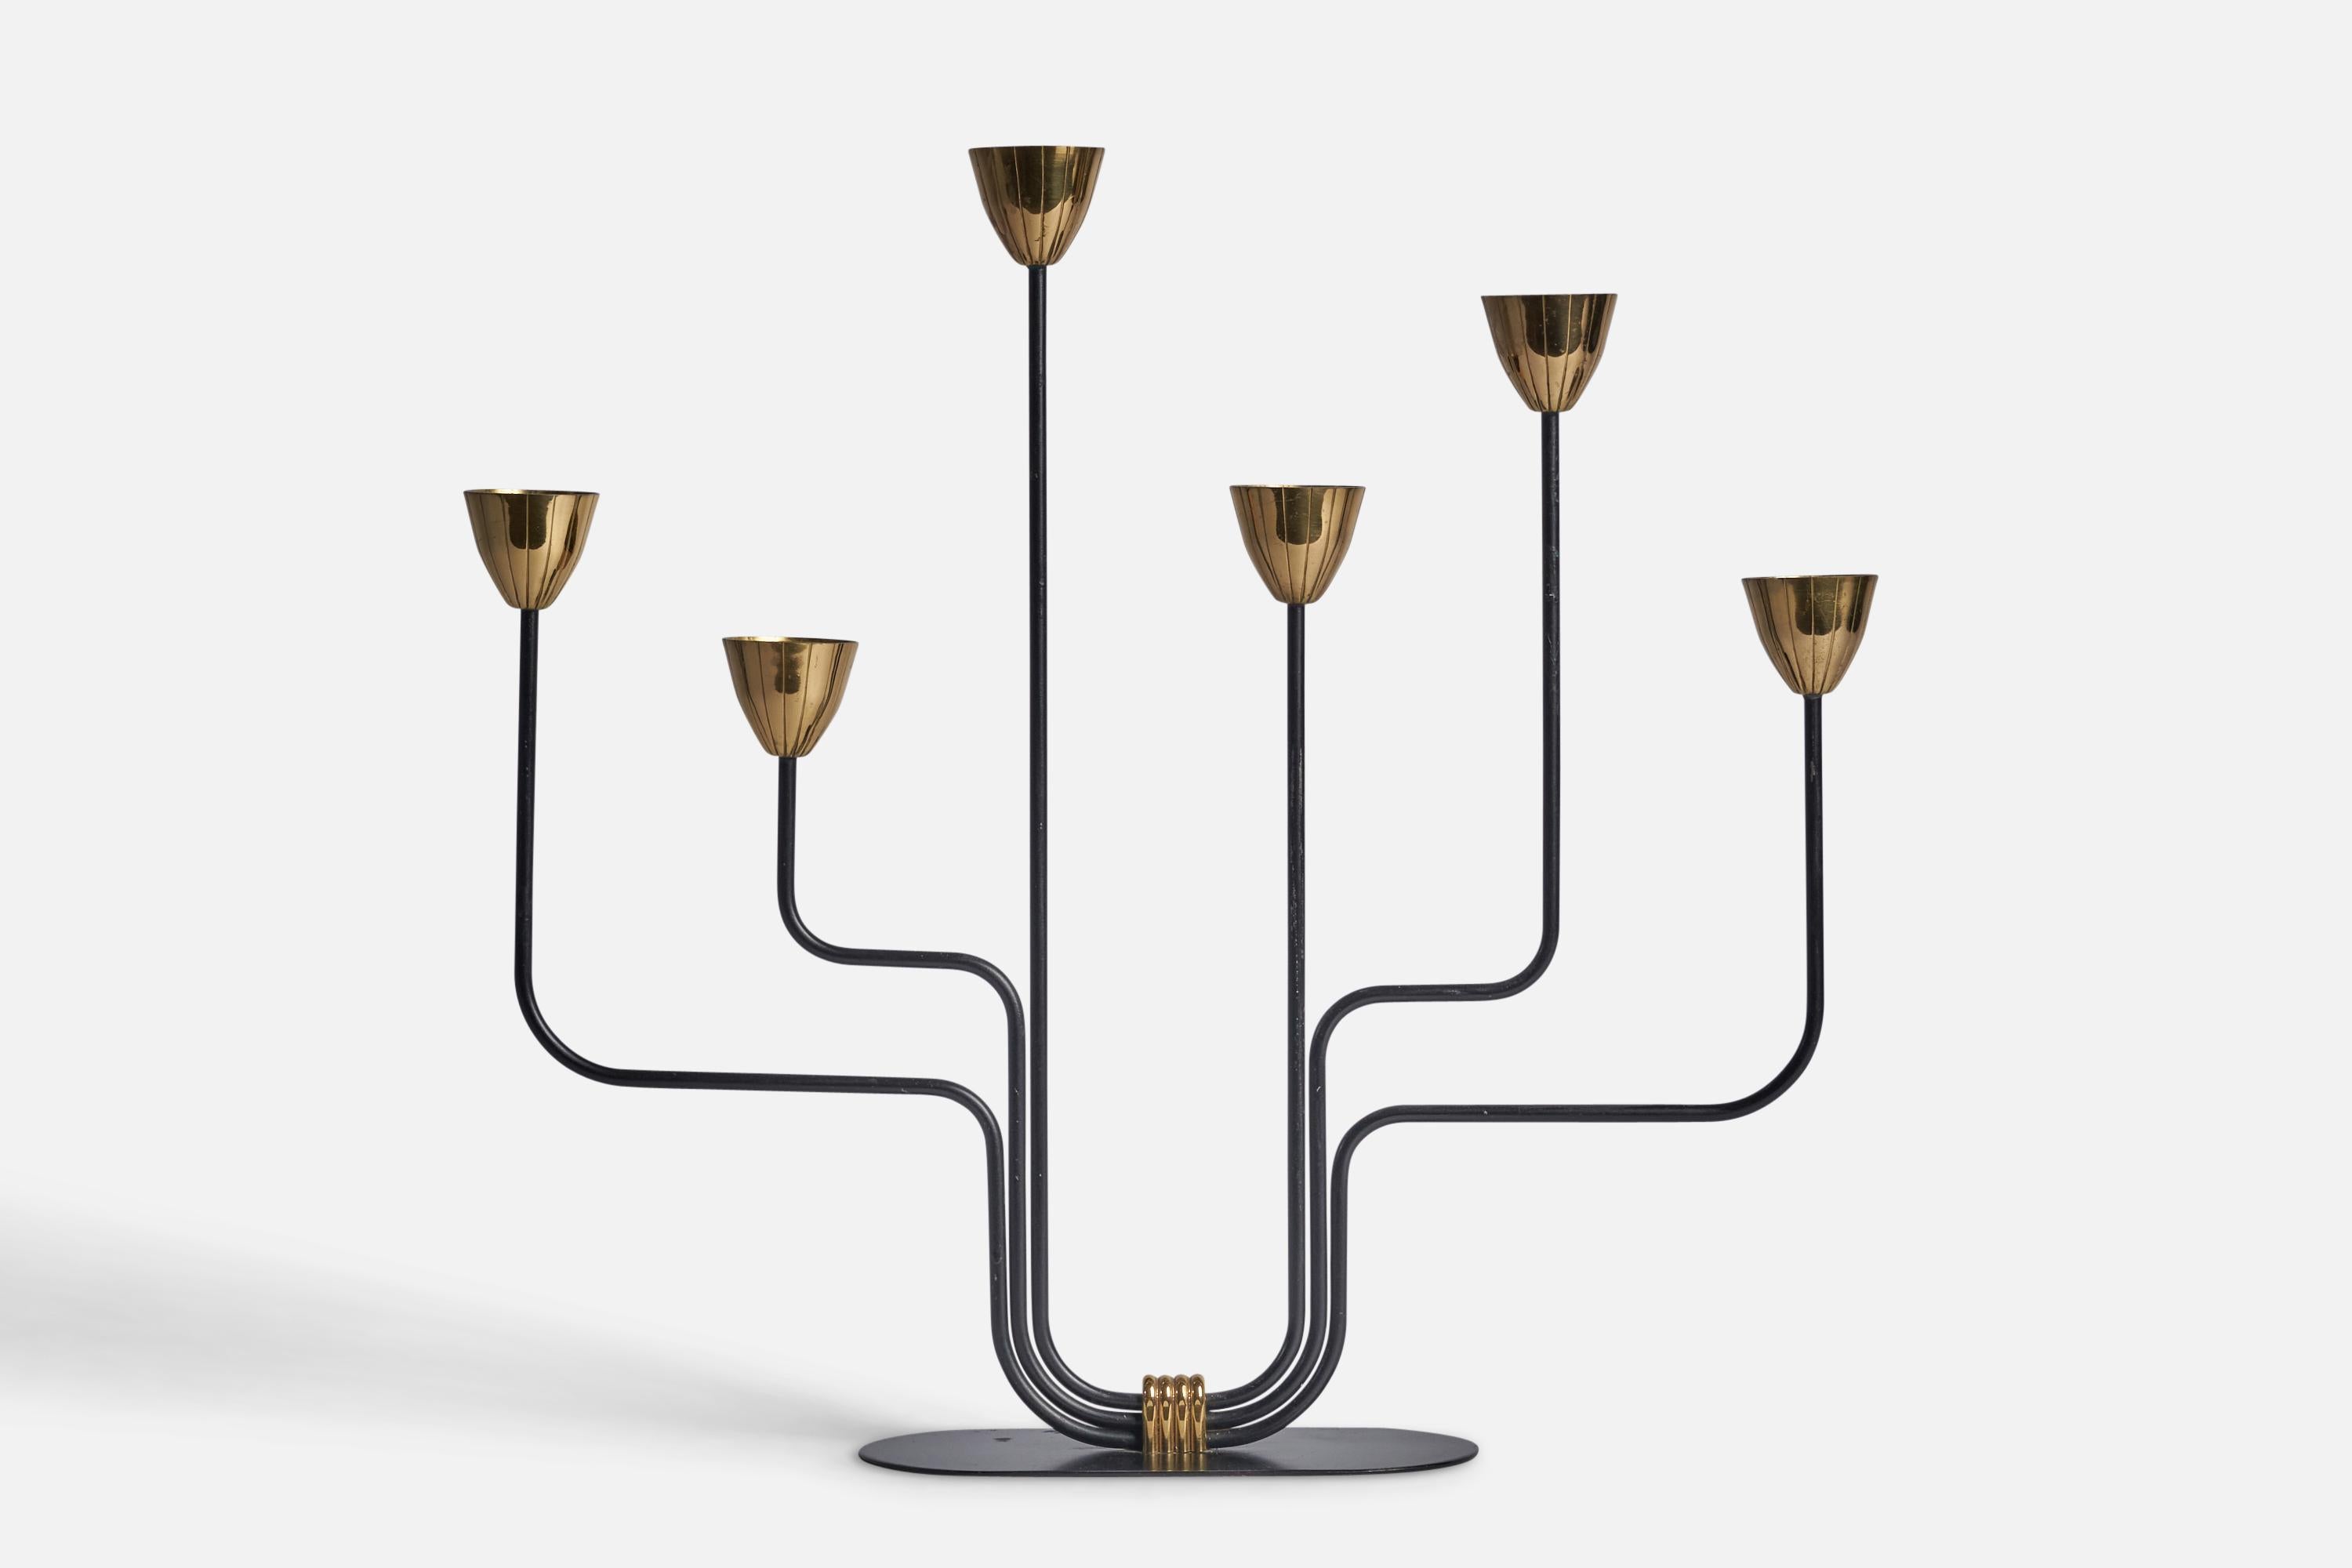 A brass and black-painted metal candelabra designed by Gunnar Ander and produced by Ystad-Metall, Sweden, c. 1950s.

Fits 0.8” diameter candles